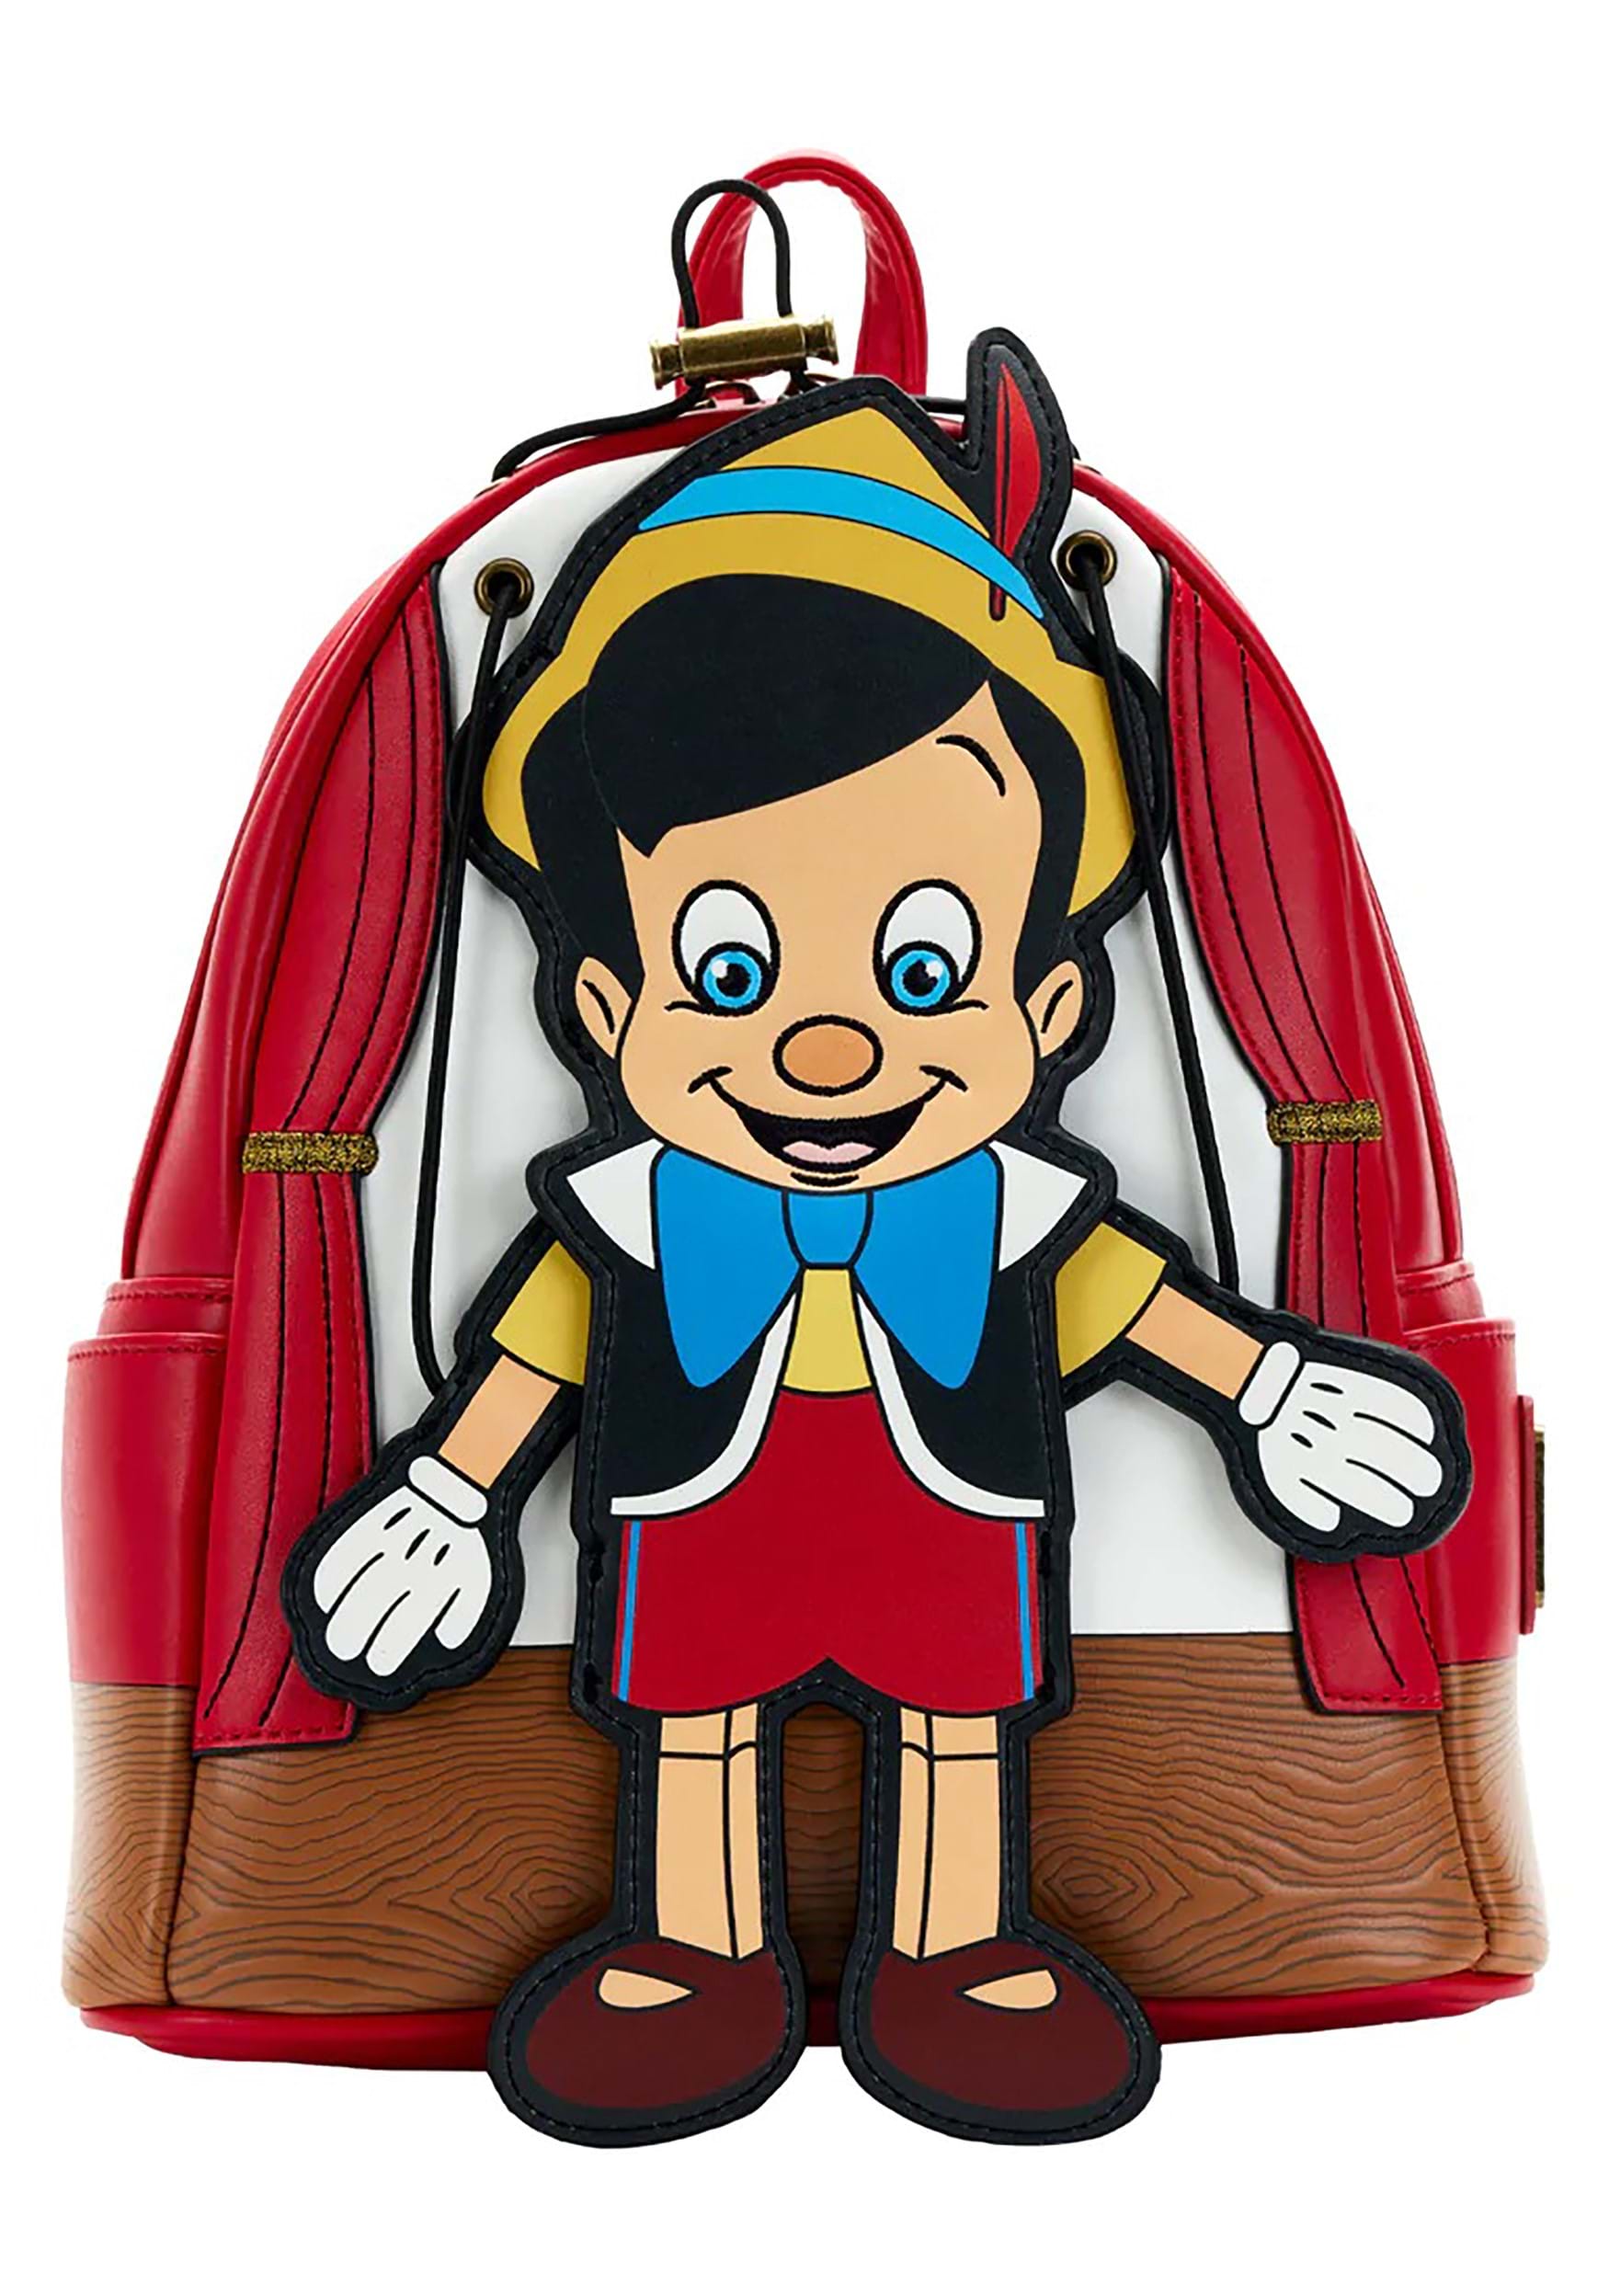 Disney Pinocchio Marionette Mini Loungefly Backpack